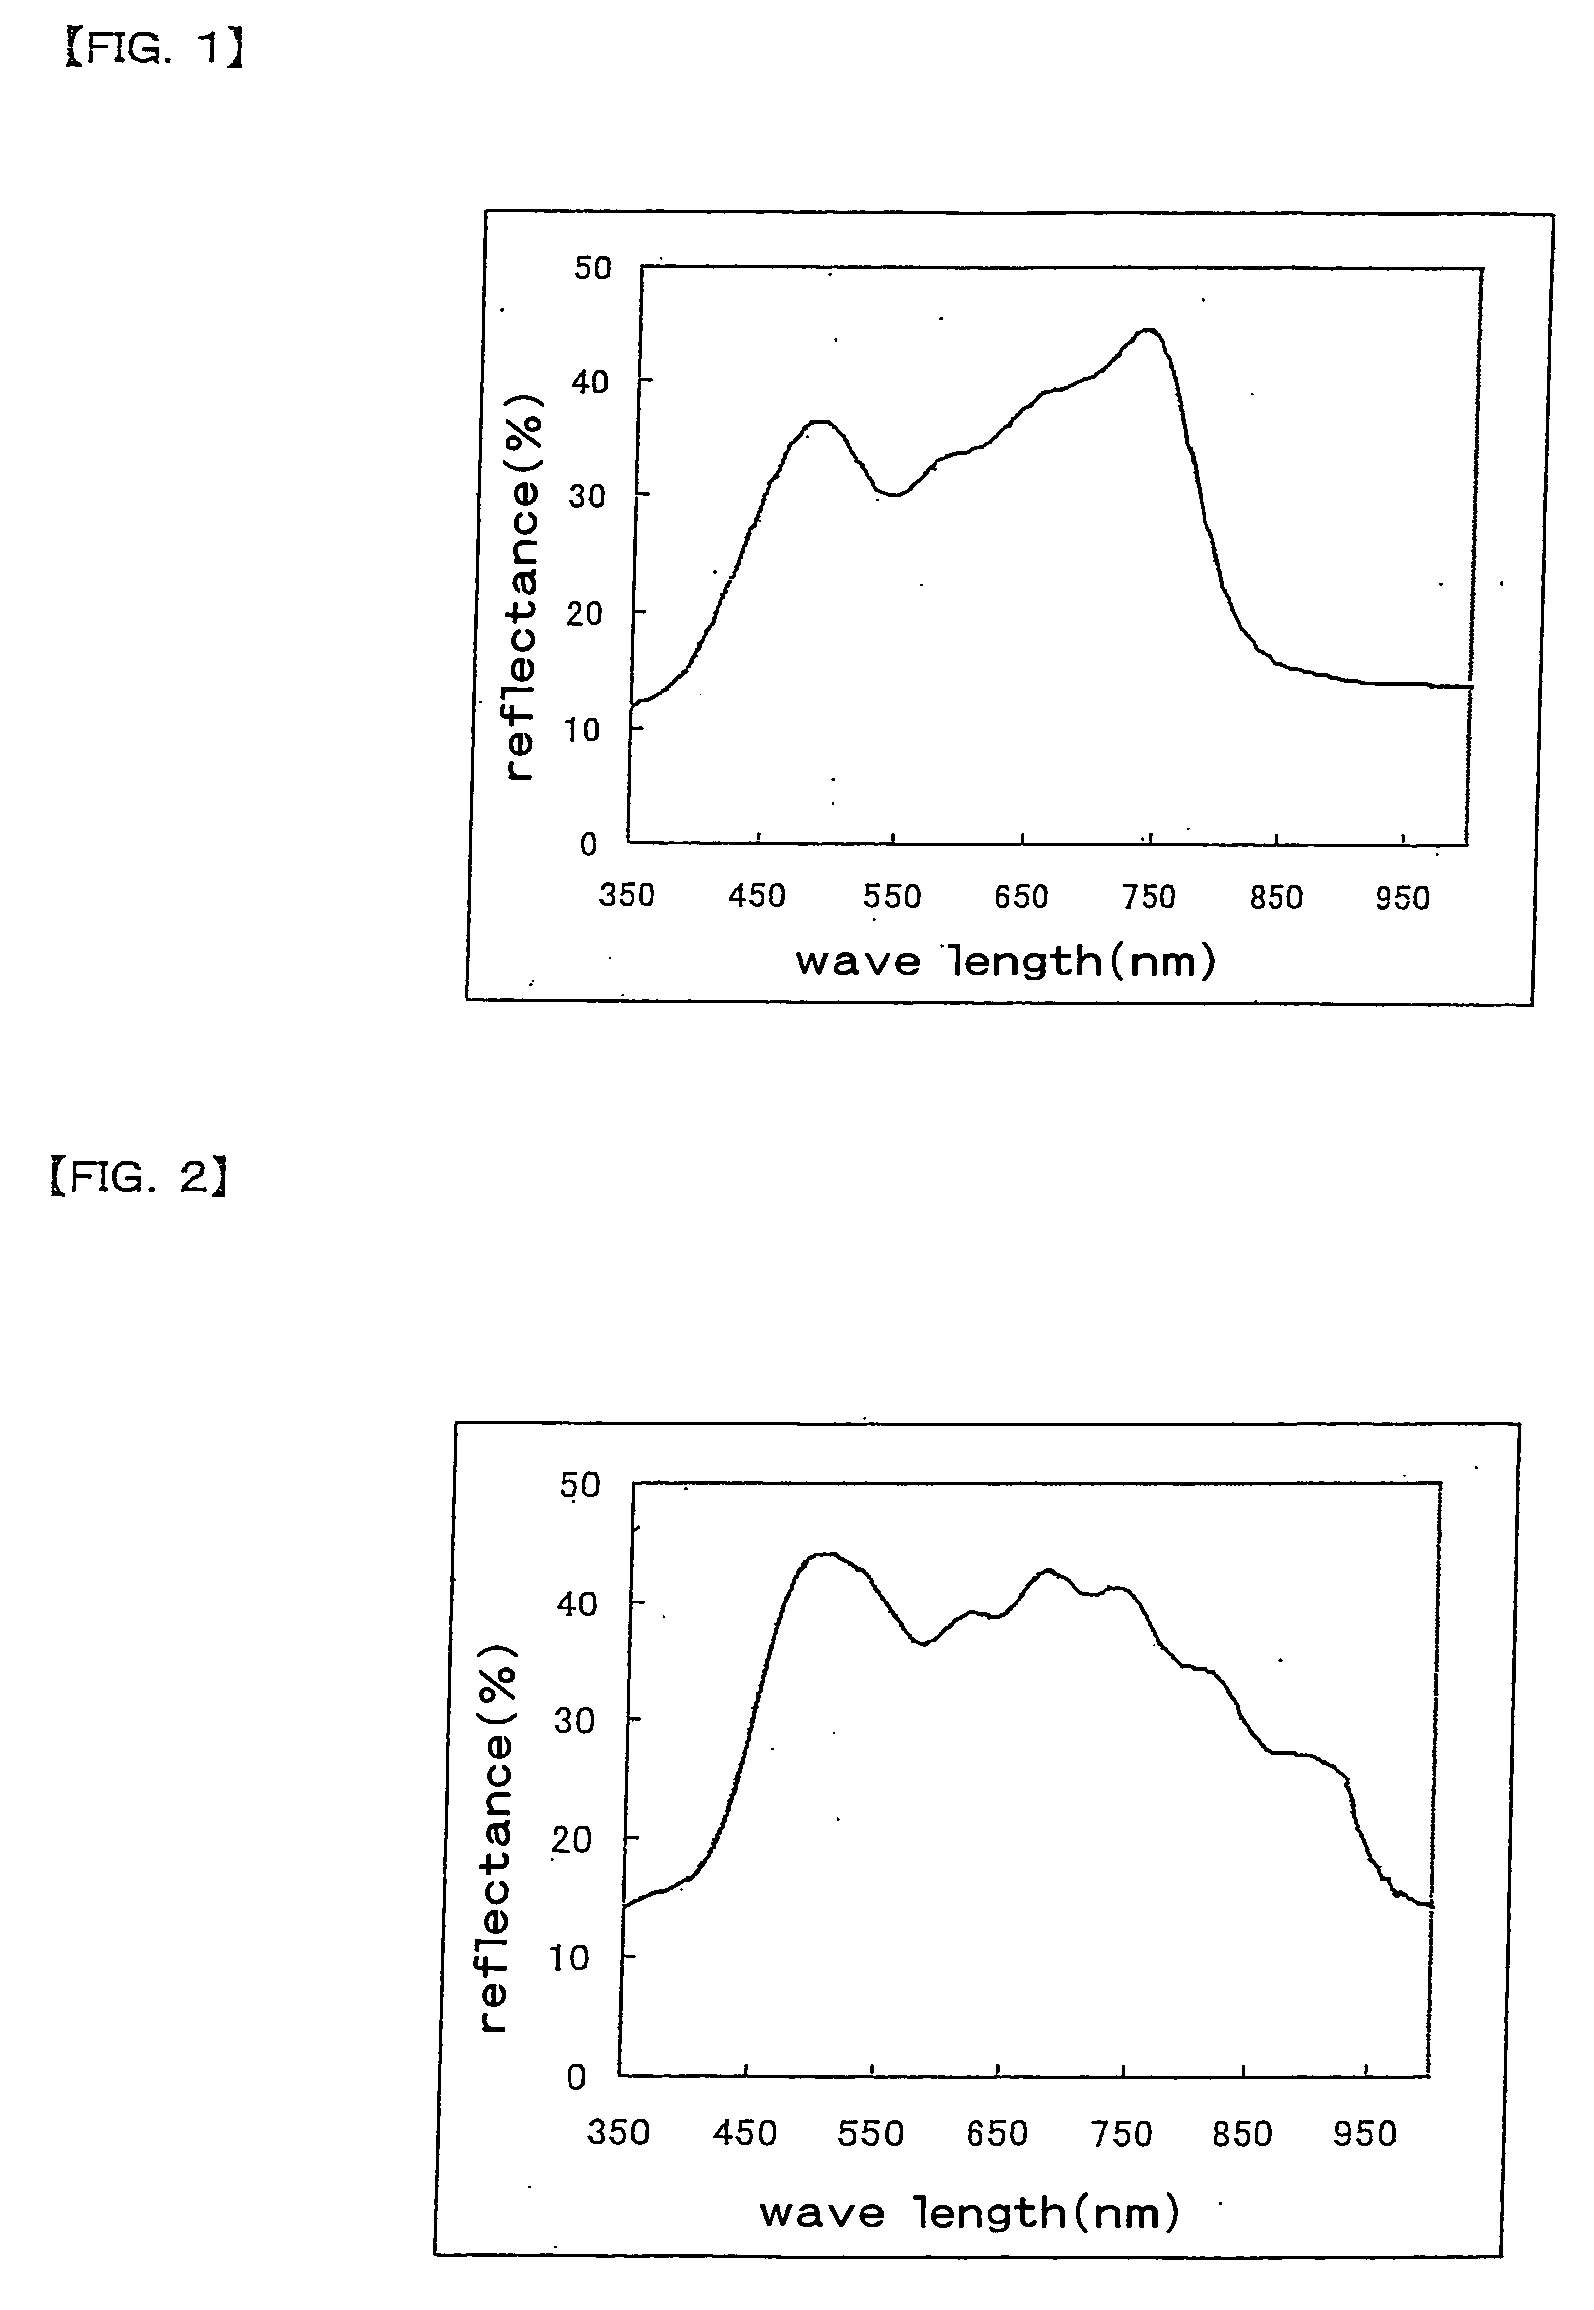 Broad-band-cholesteric liquid-crystal film, process for producing the same, circularly polarizing plate, linearly polarizing element,illiminator, and liquid-crystal display